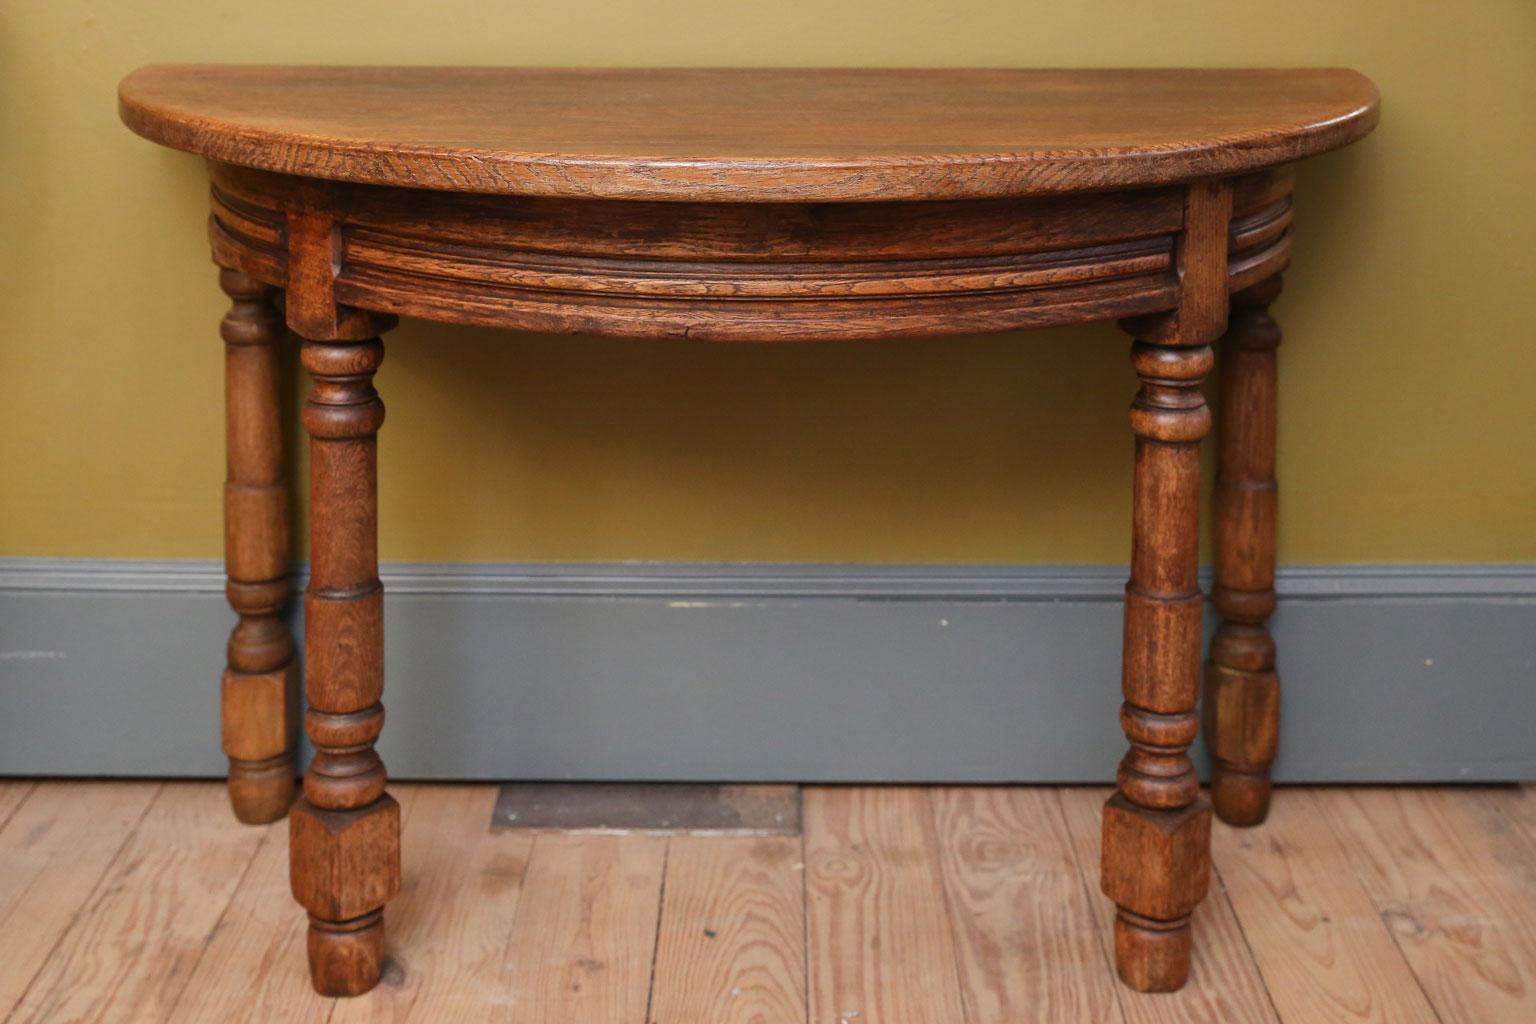 Pair of oak Demilune consoles: nice robust turning and proportion. Rustic or country in style, circa 1890-1930. Sold together as a pair. The oak has nice graining and the tables are simple and rustic.